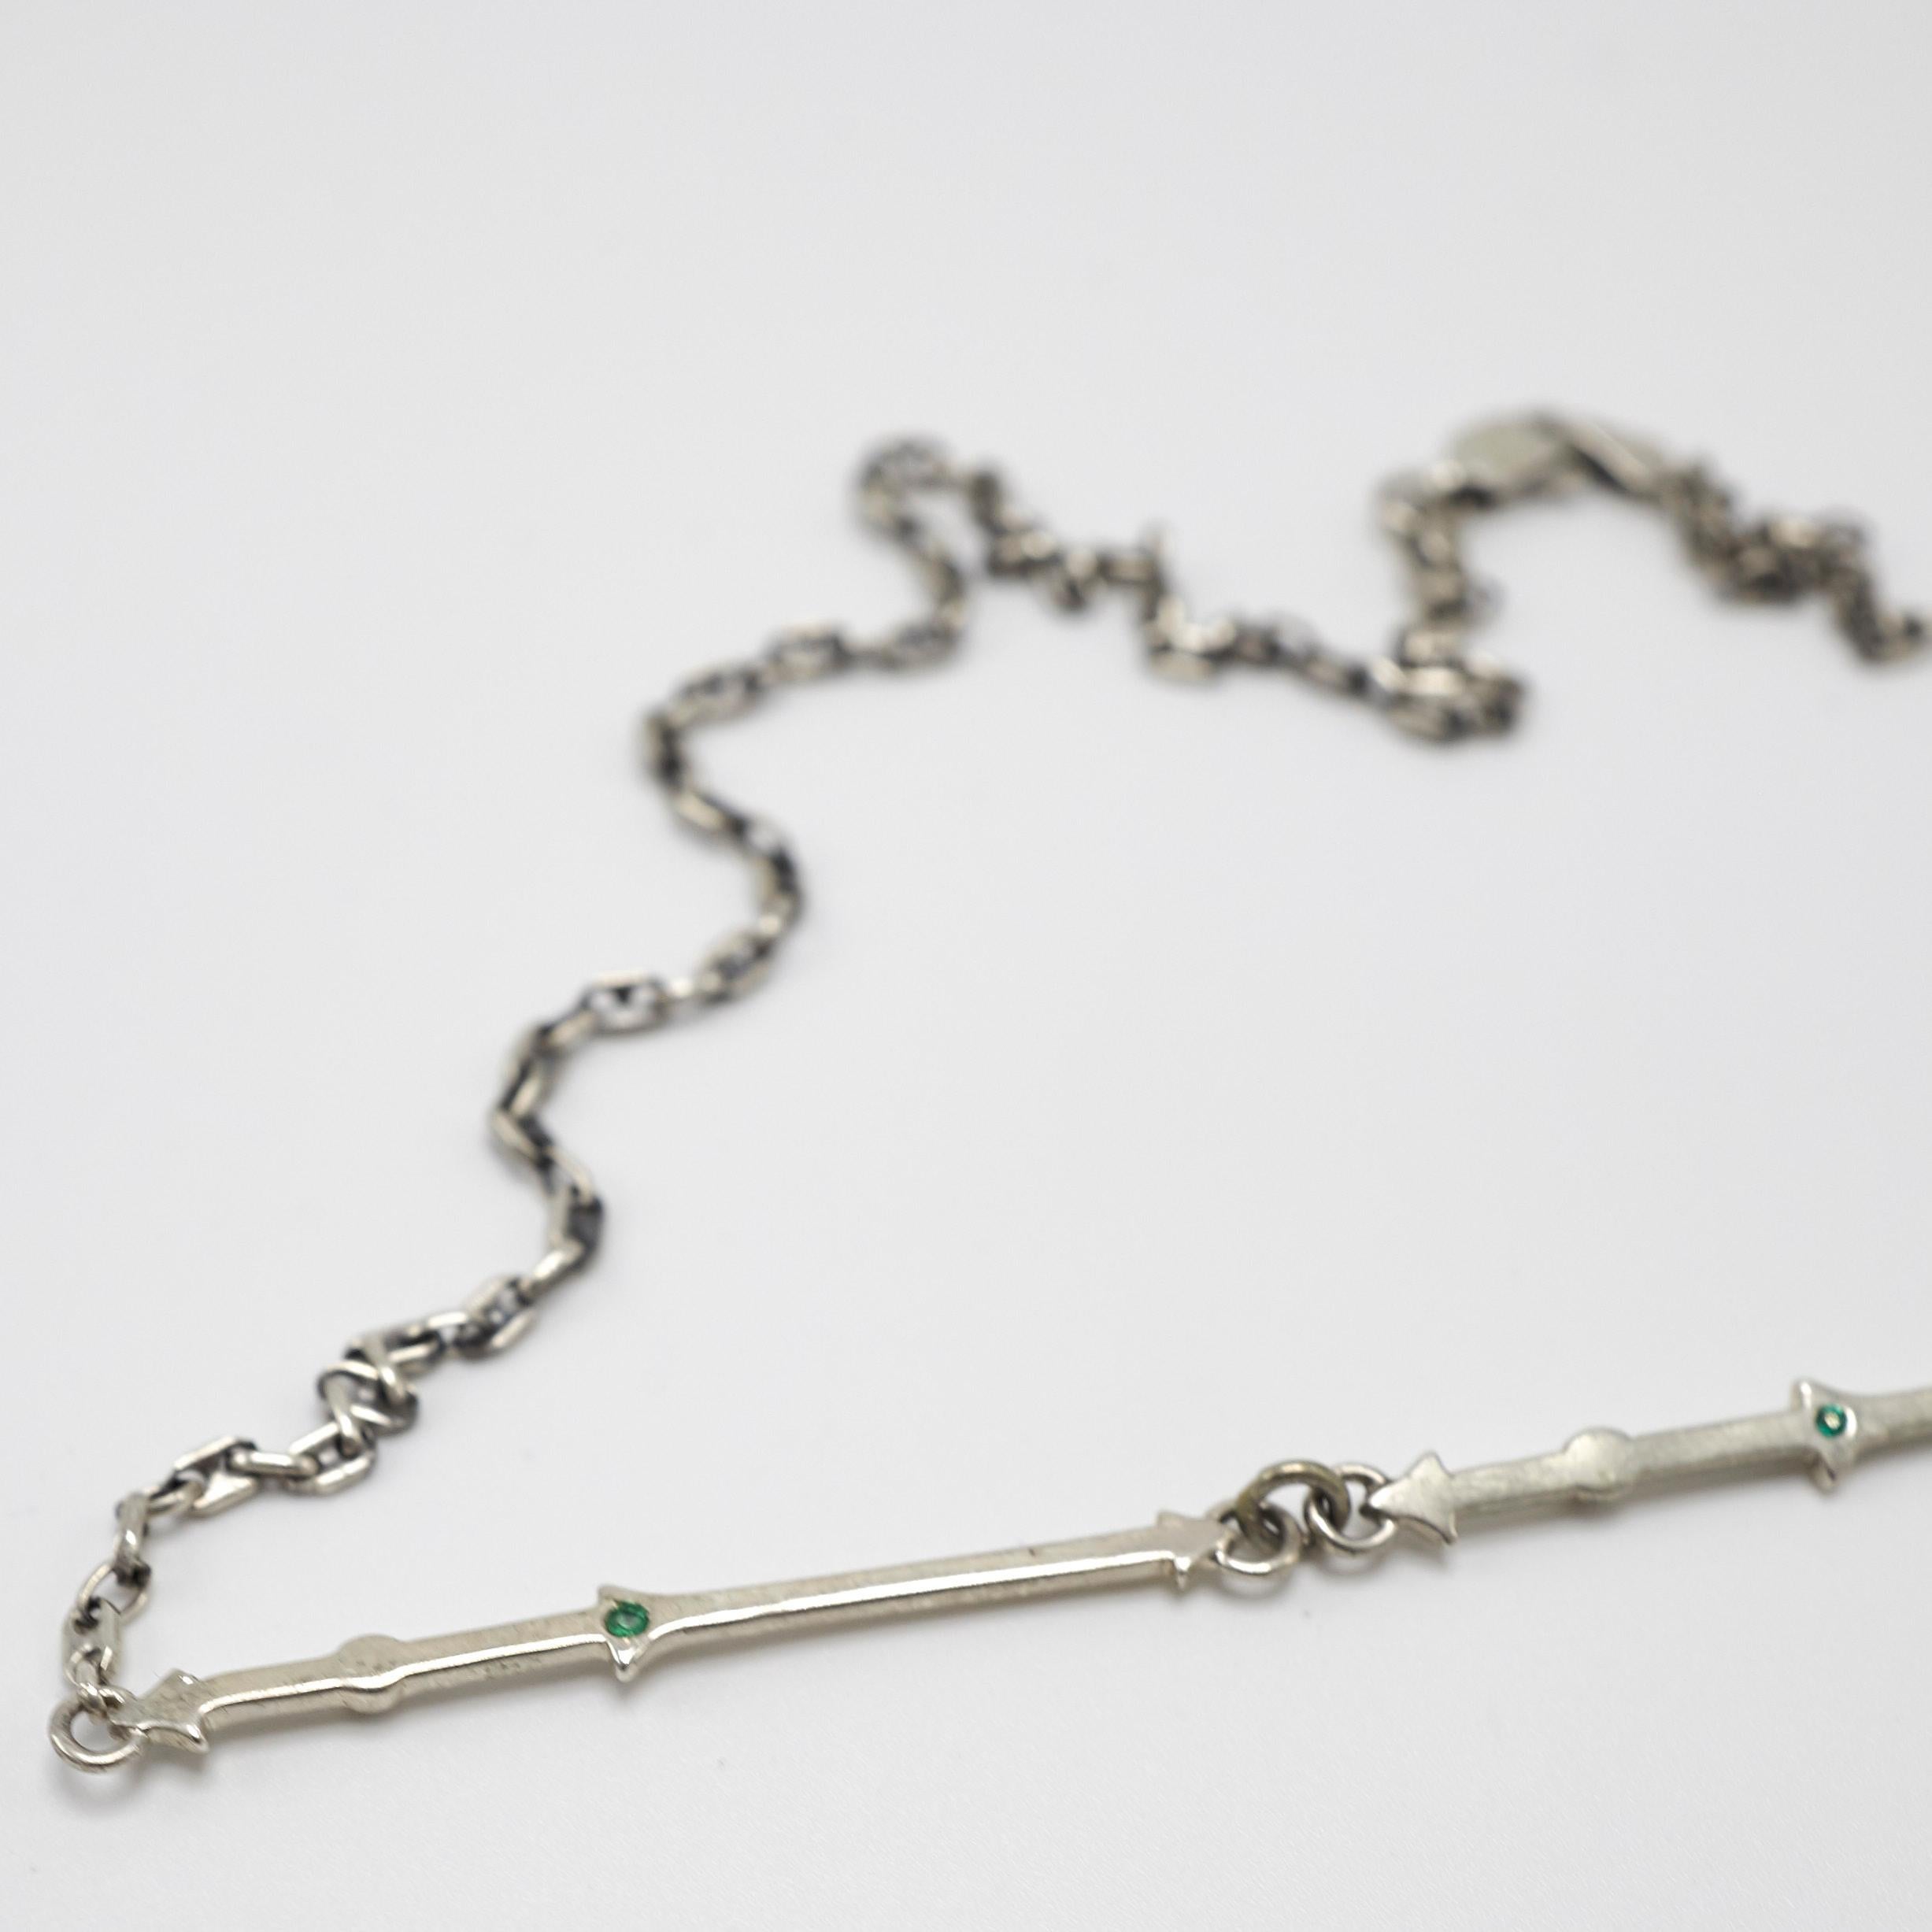 Emerald Silver Chain Pendant Necklace Choker J Dauphin
Made with 3 Emeralds

J DAUPHIN 